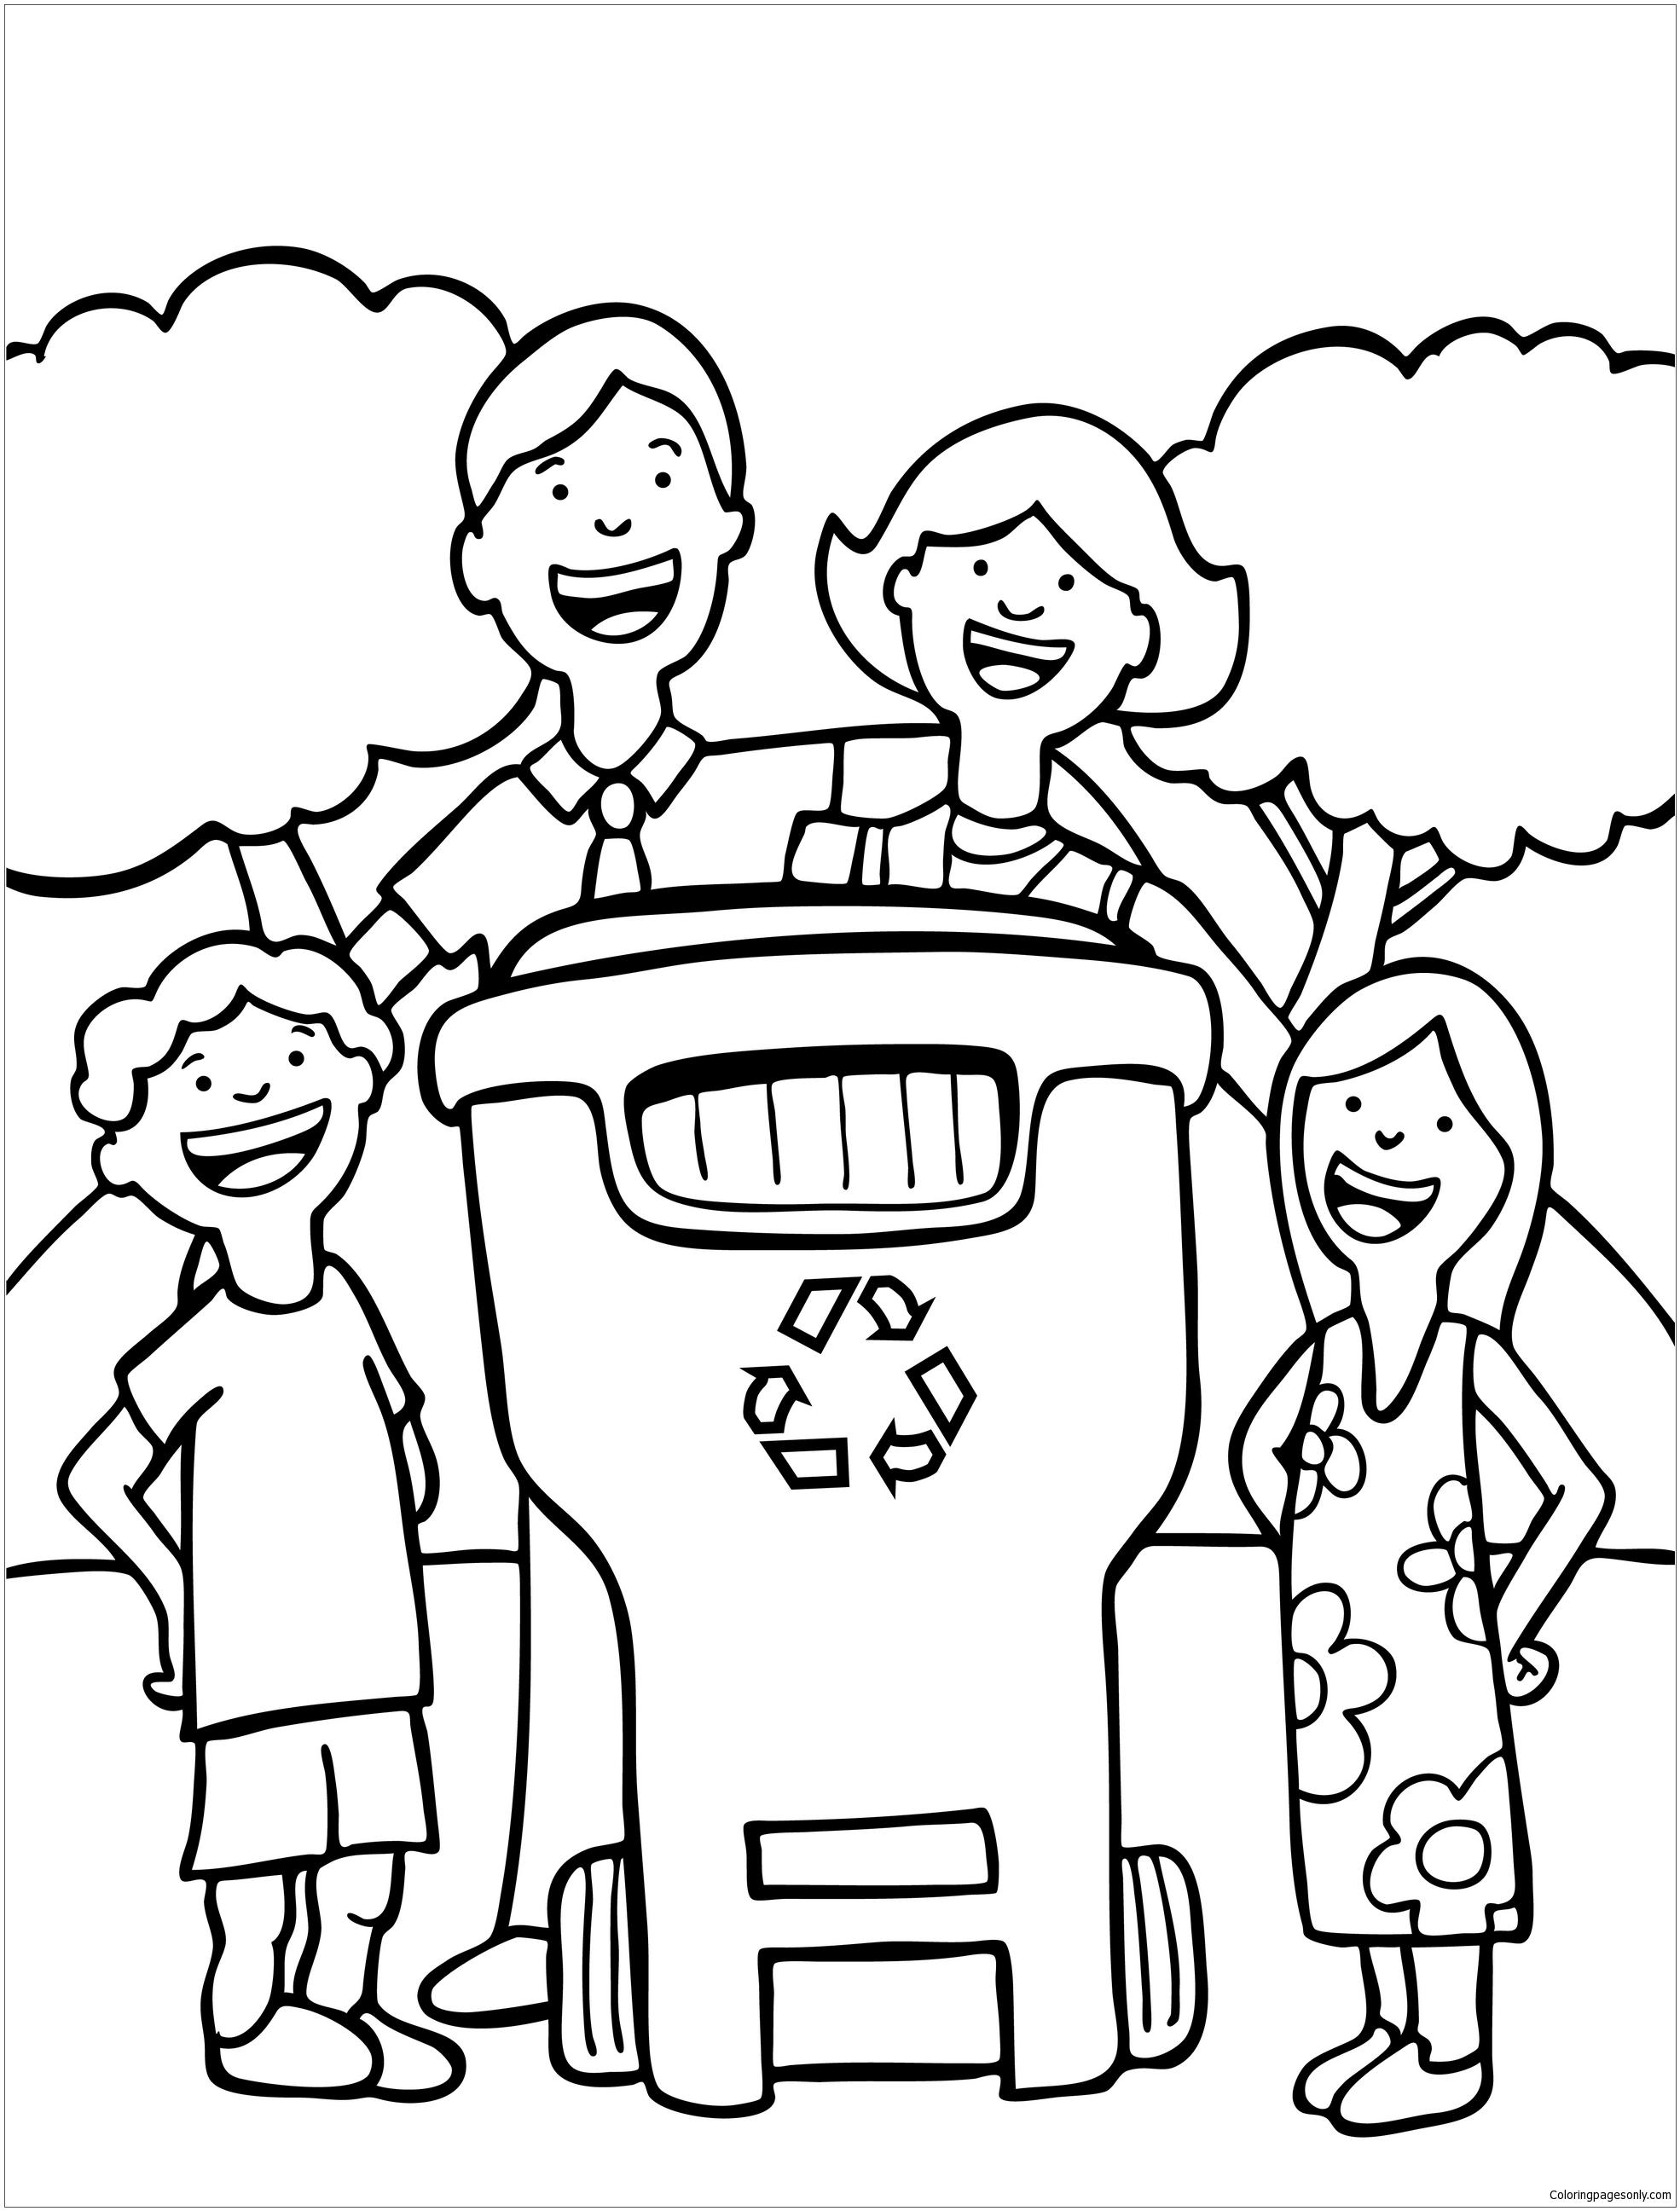 Recycling coloring pages